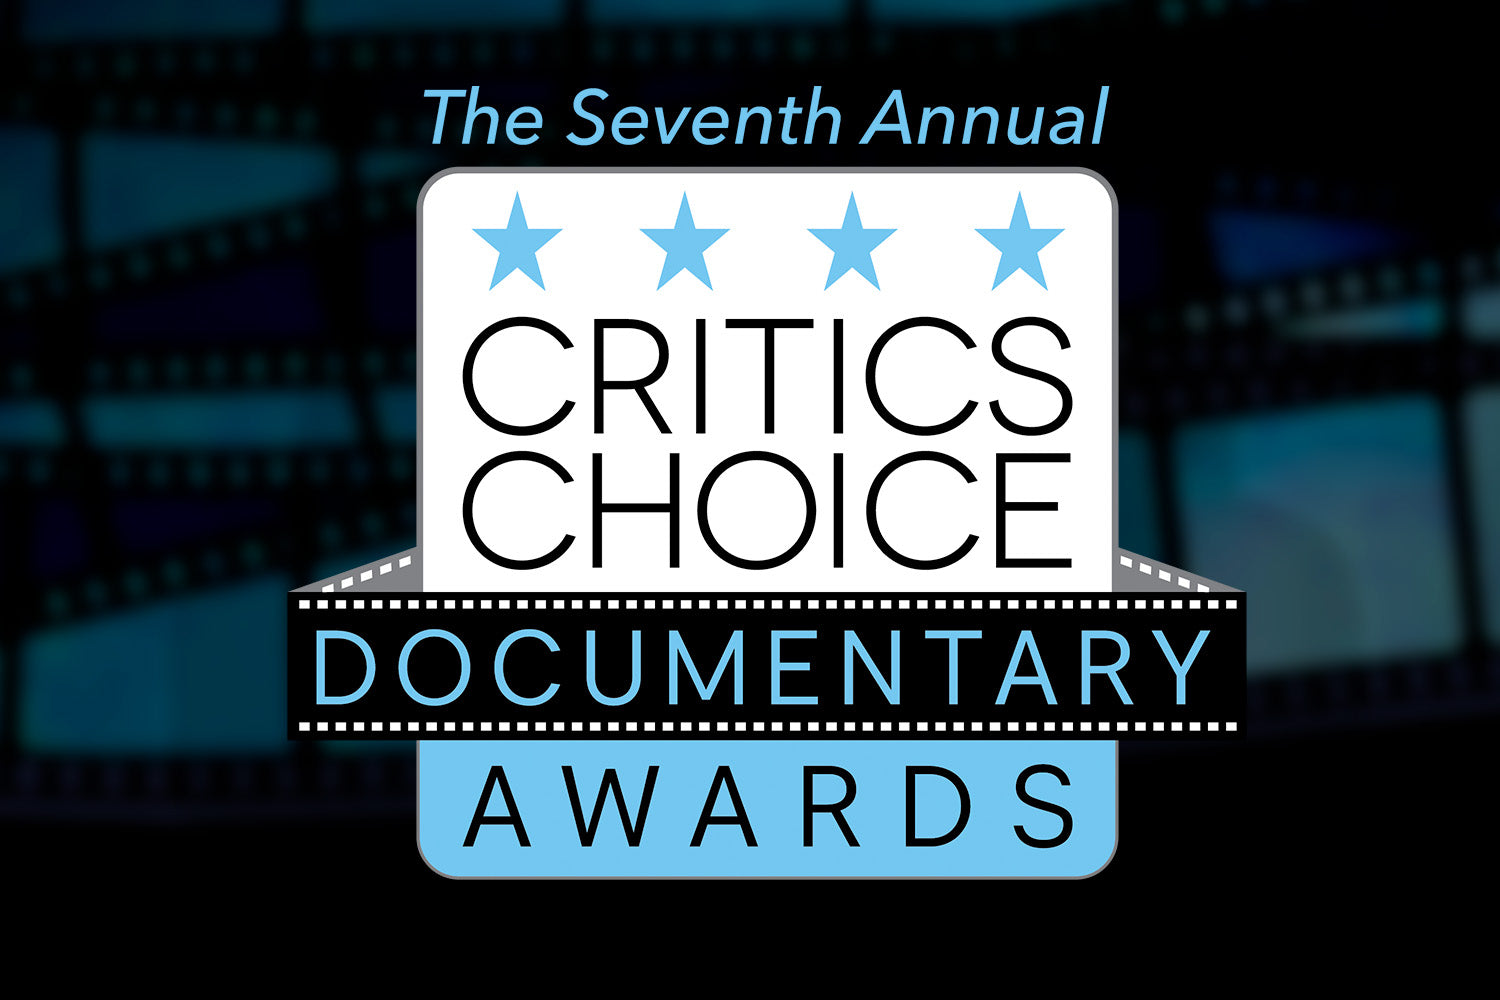 Nominations Unveiled For The Seventh Annual Critics Choice Documentary Awards, Presented by National Geographic Documentary Films